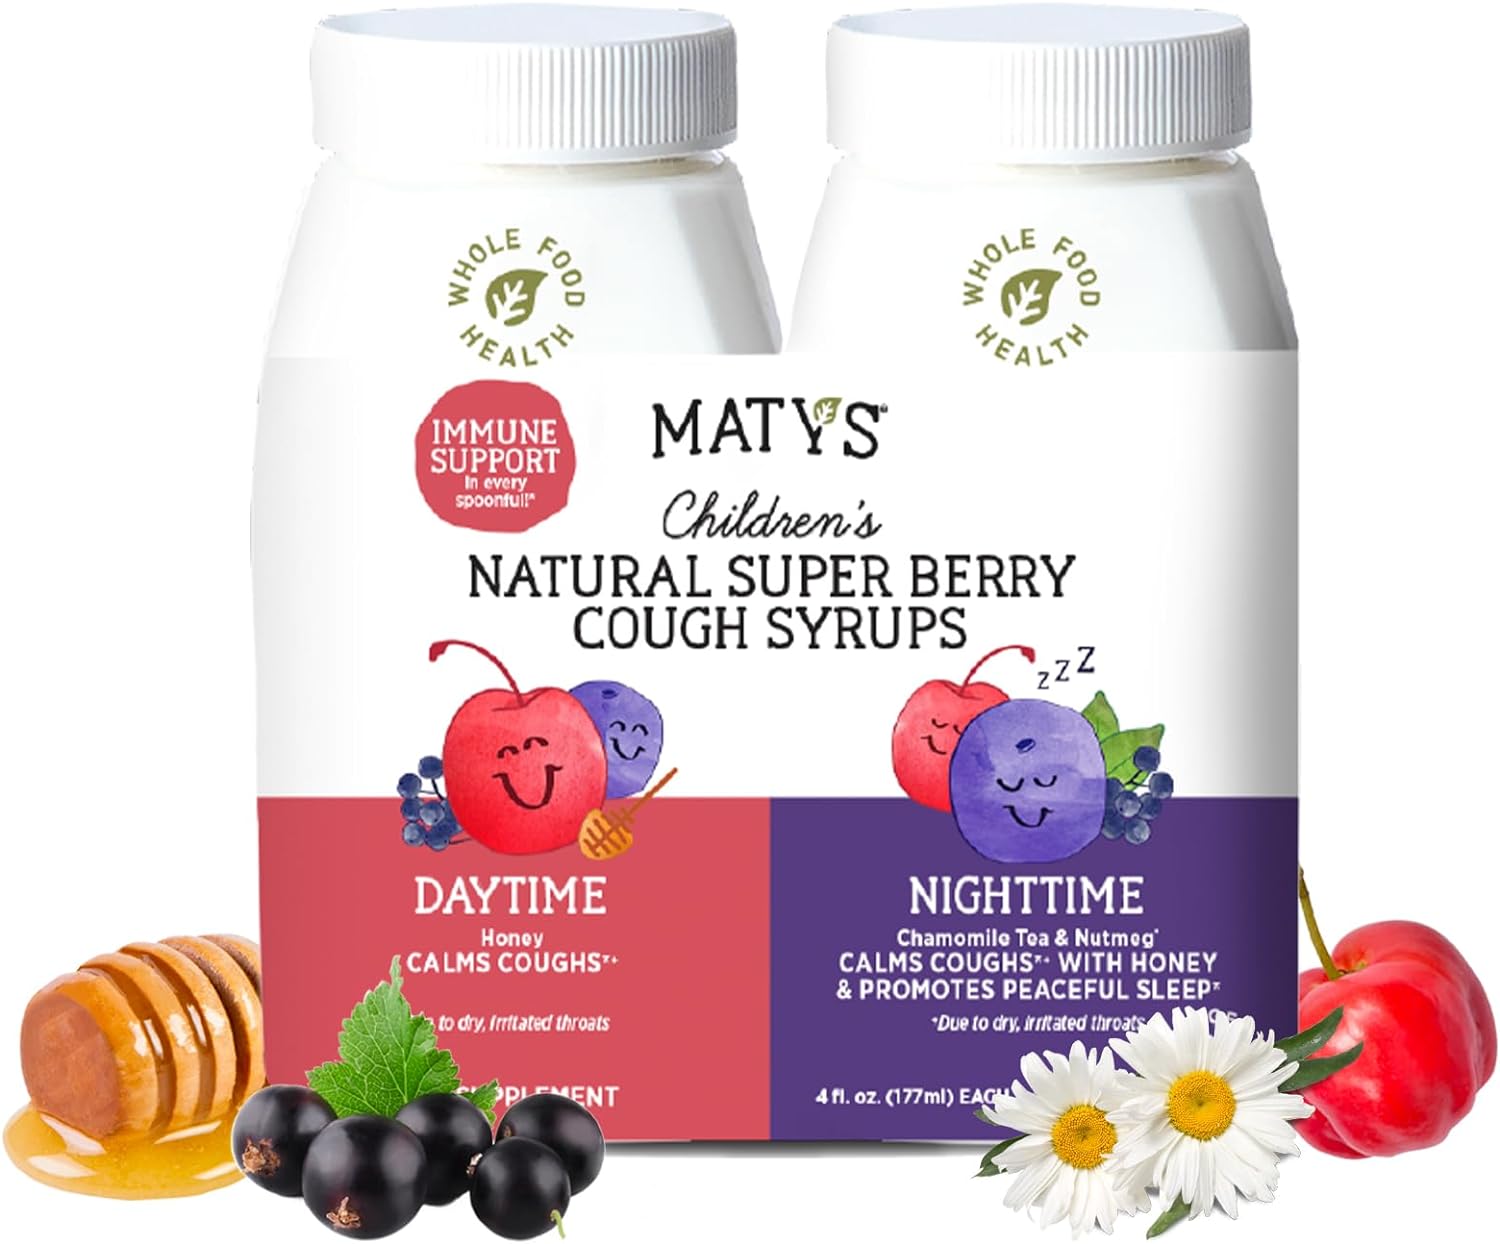 Matys Super Berry Kids Cough Syrup Day & Night Value Pack for Children 1 Year + Up, Soothing Daytime & Nighttime Cough Relief from Our Elderberry Superfood Blend, Honey, & Zinc, 2 Pack, 4 Fl Oz Each